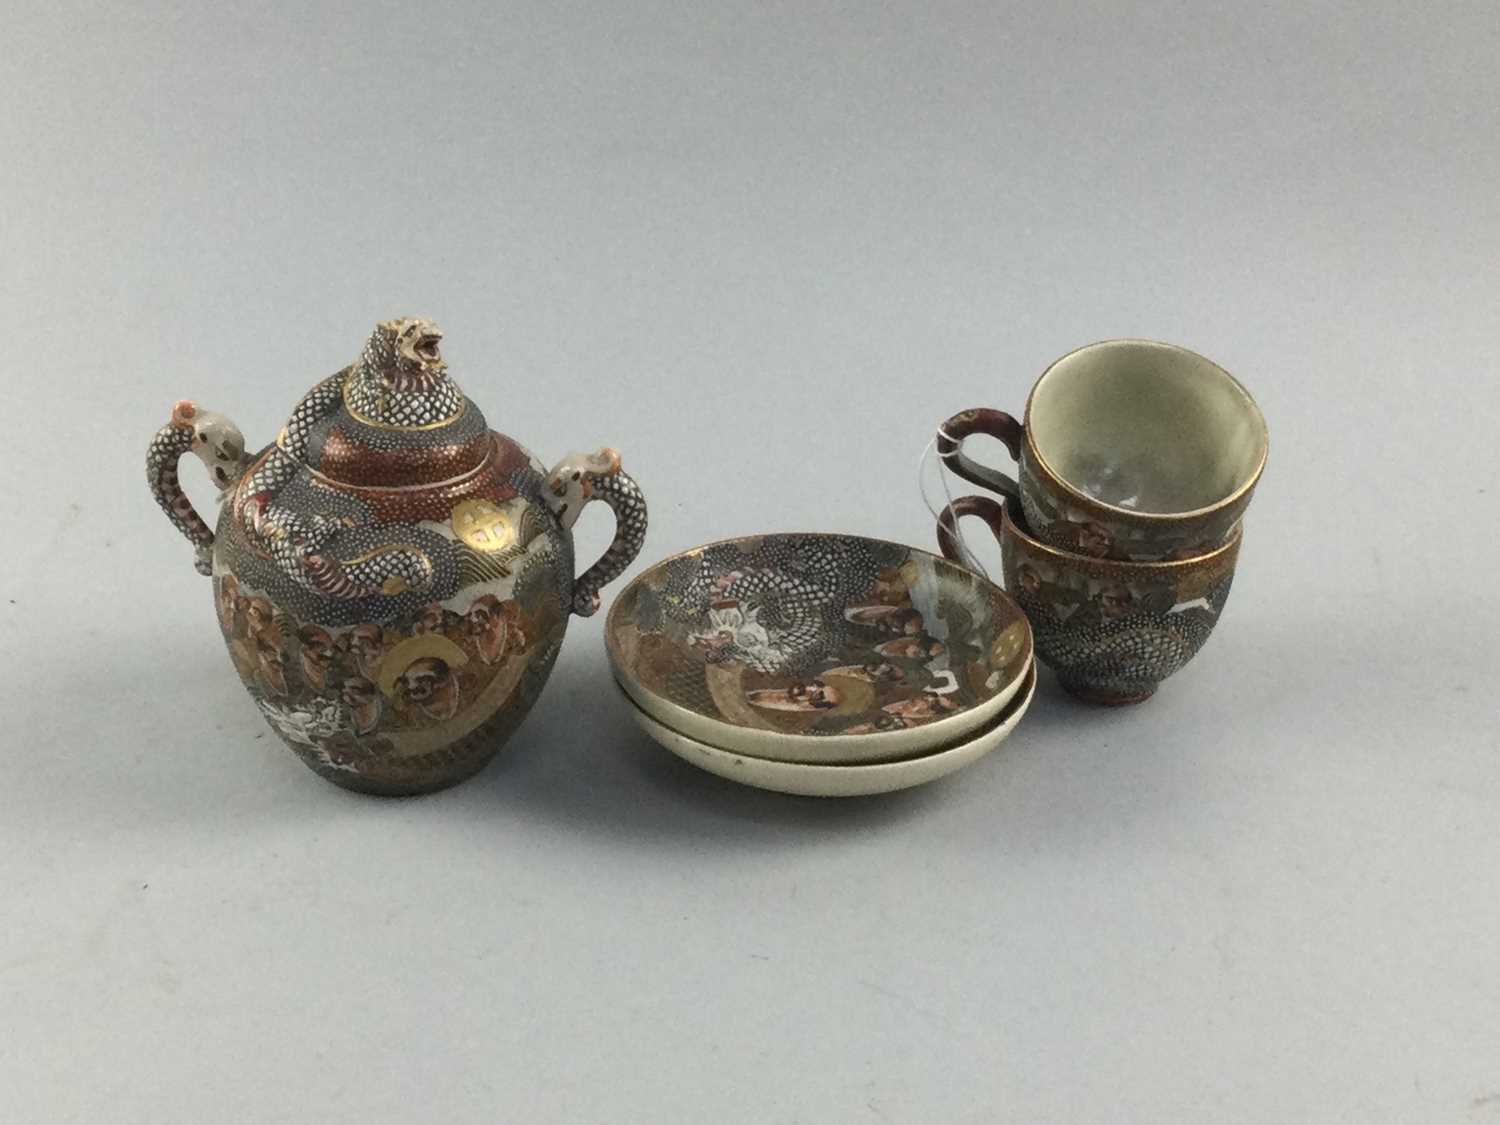 Lot 13 - A PAIR OF JAPANESE SATSUMA CUPS AND SAUCERS